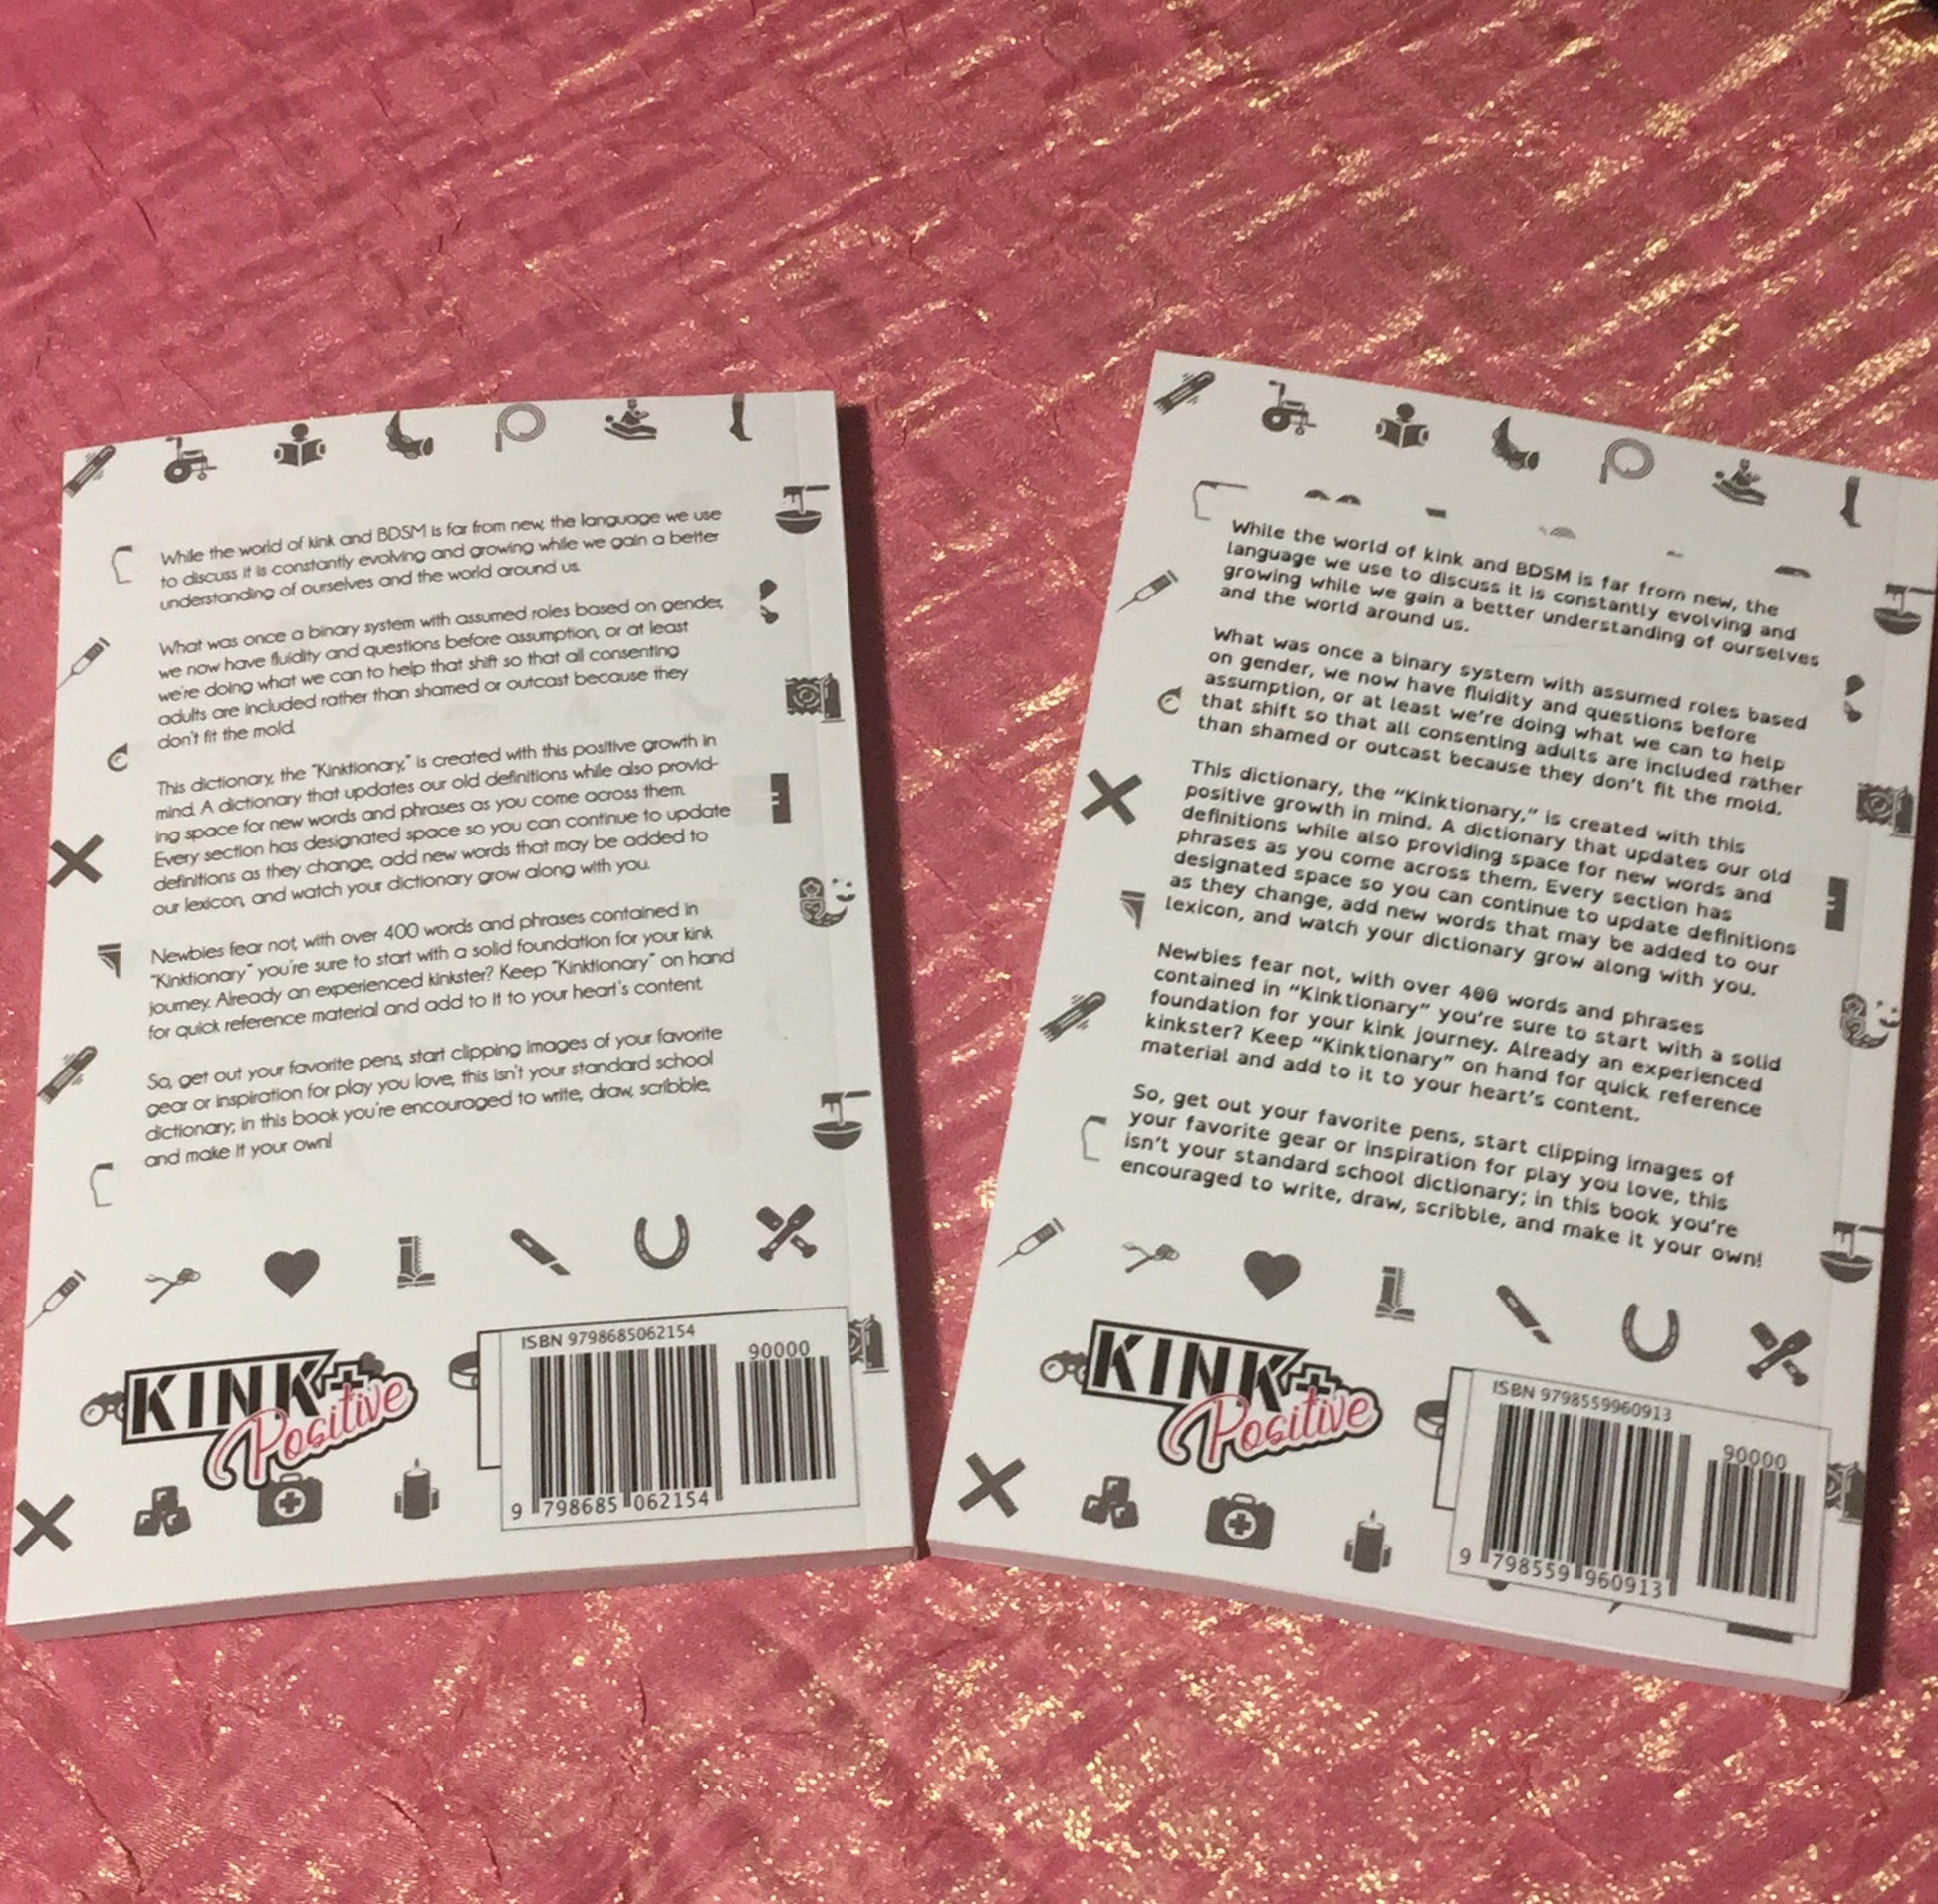 Two books displaying the back covers of both print versions of Kinktionary - Ignixia Roberts.